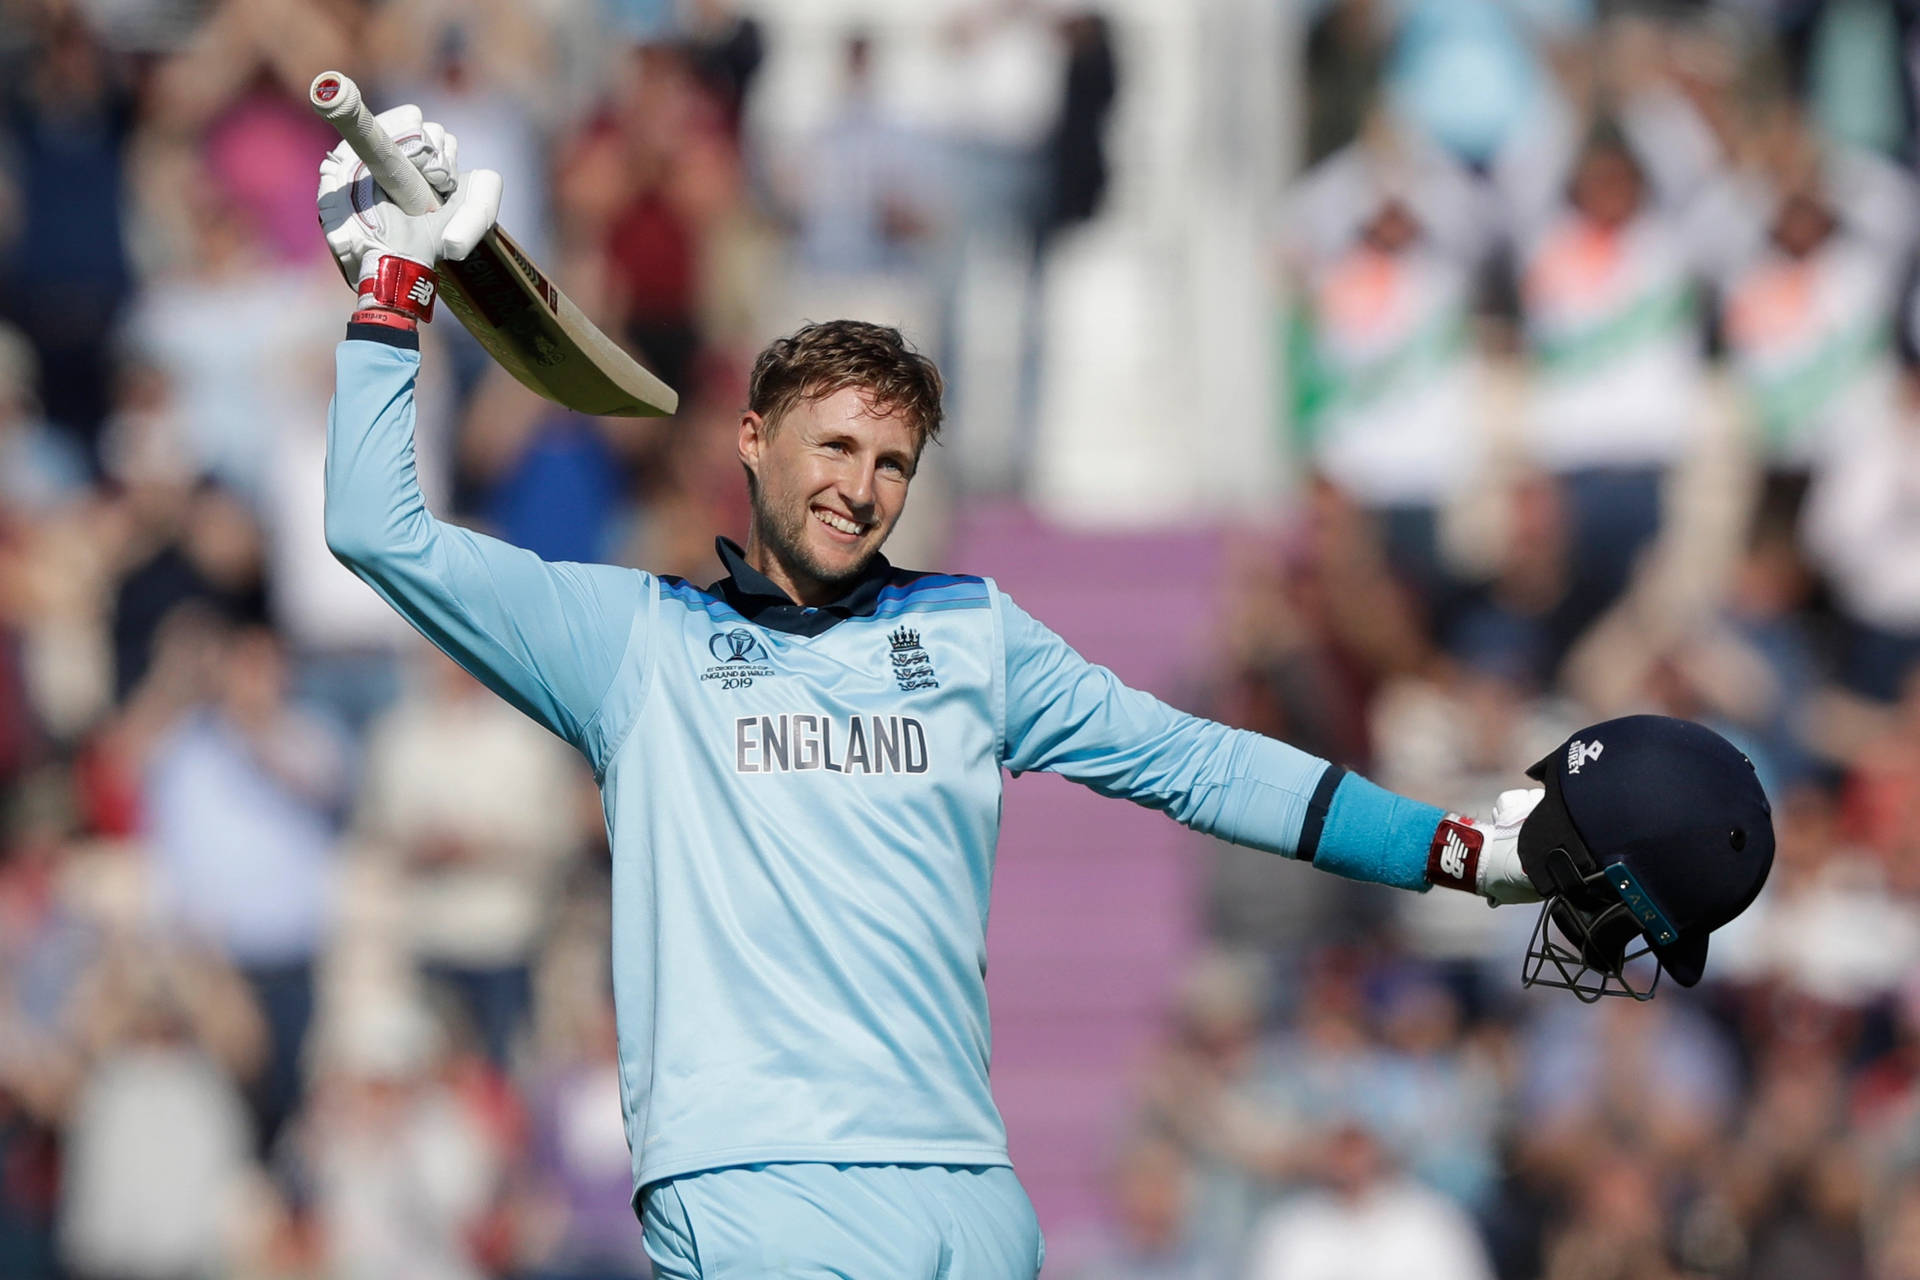 England Cricketer Joe Root In A Moment Of Triumph